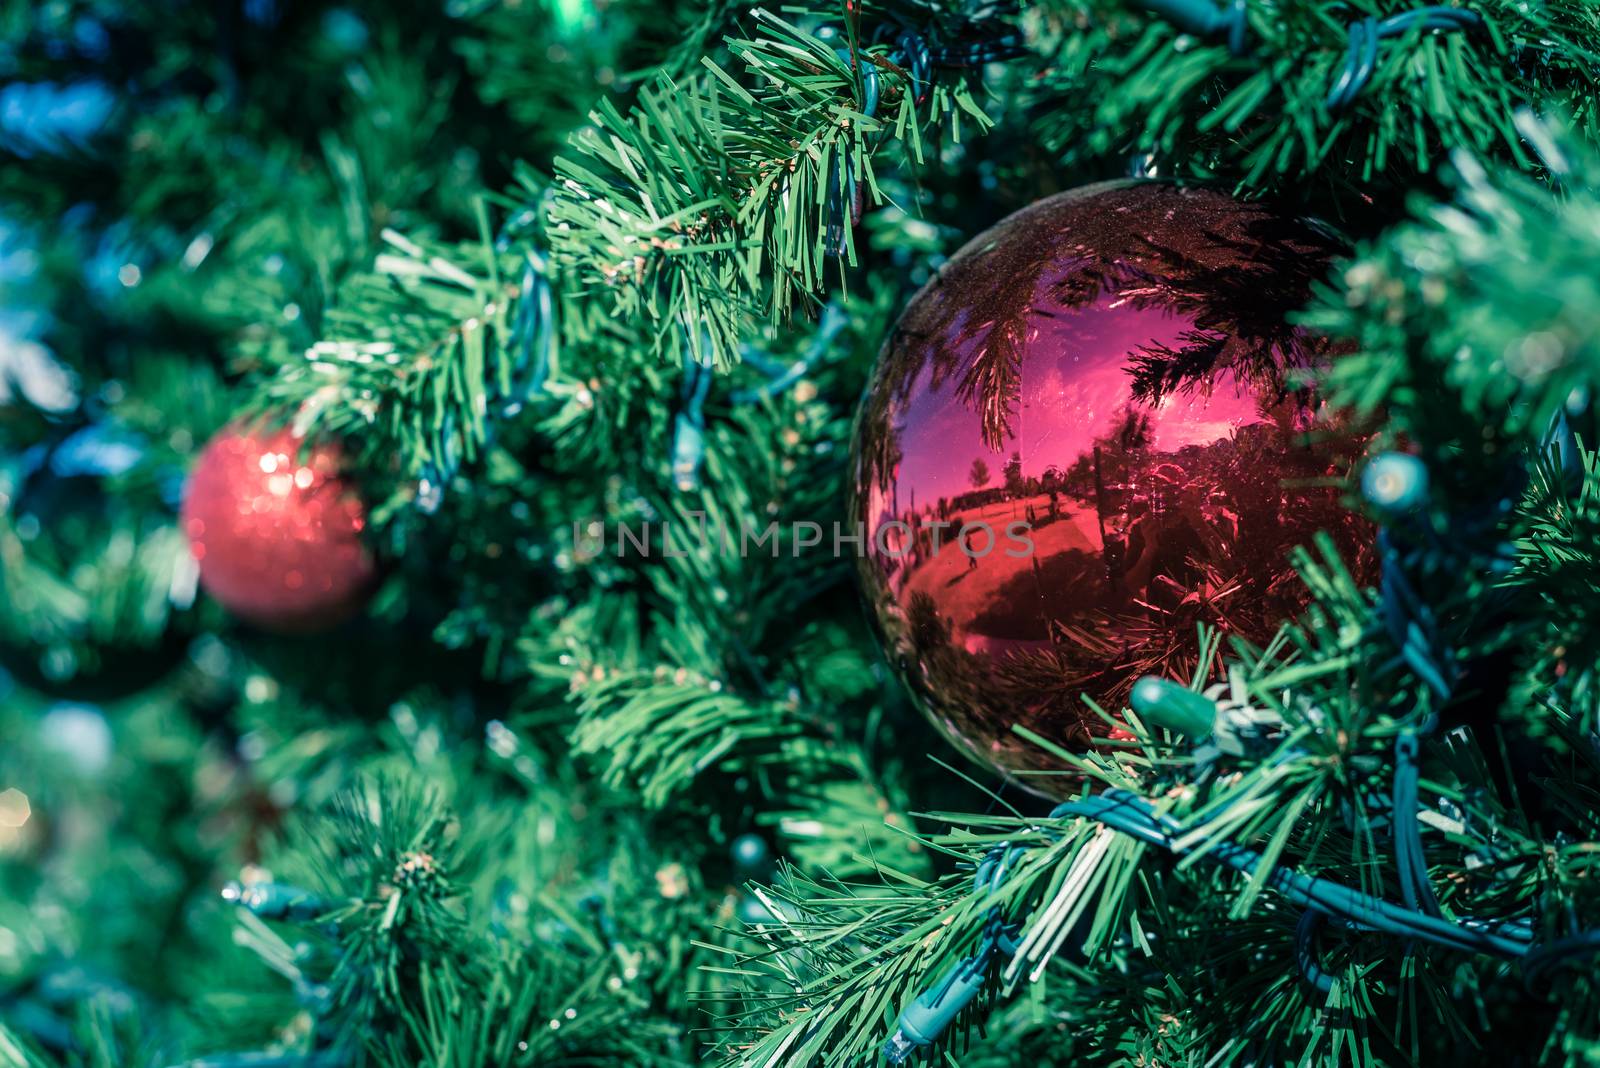 Vintage tone shiny Christmas red ball hanging on pine branches at daytime light. Baubles and branch of spruce tree. Traditional artificial Xmas tree with ball ornament at public park near Dallas, Texas